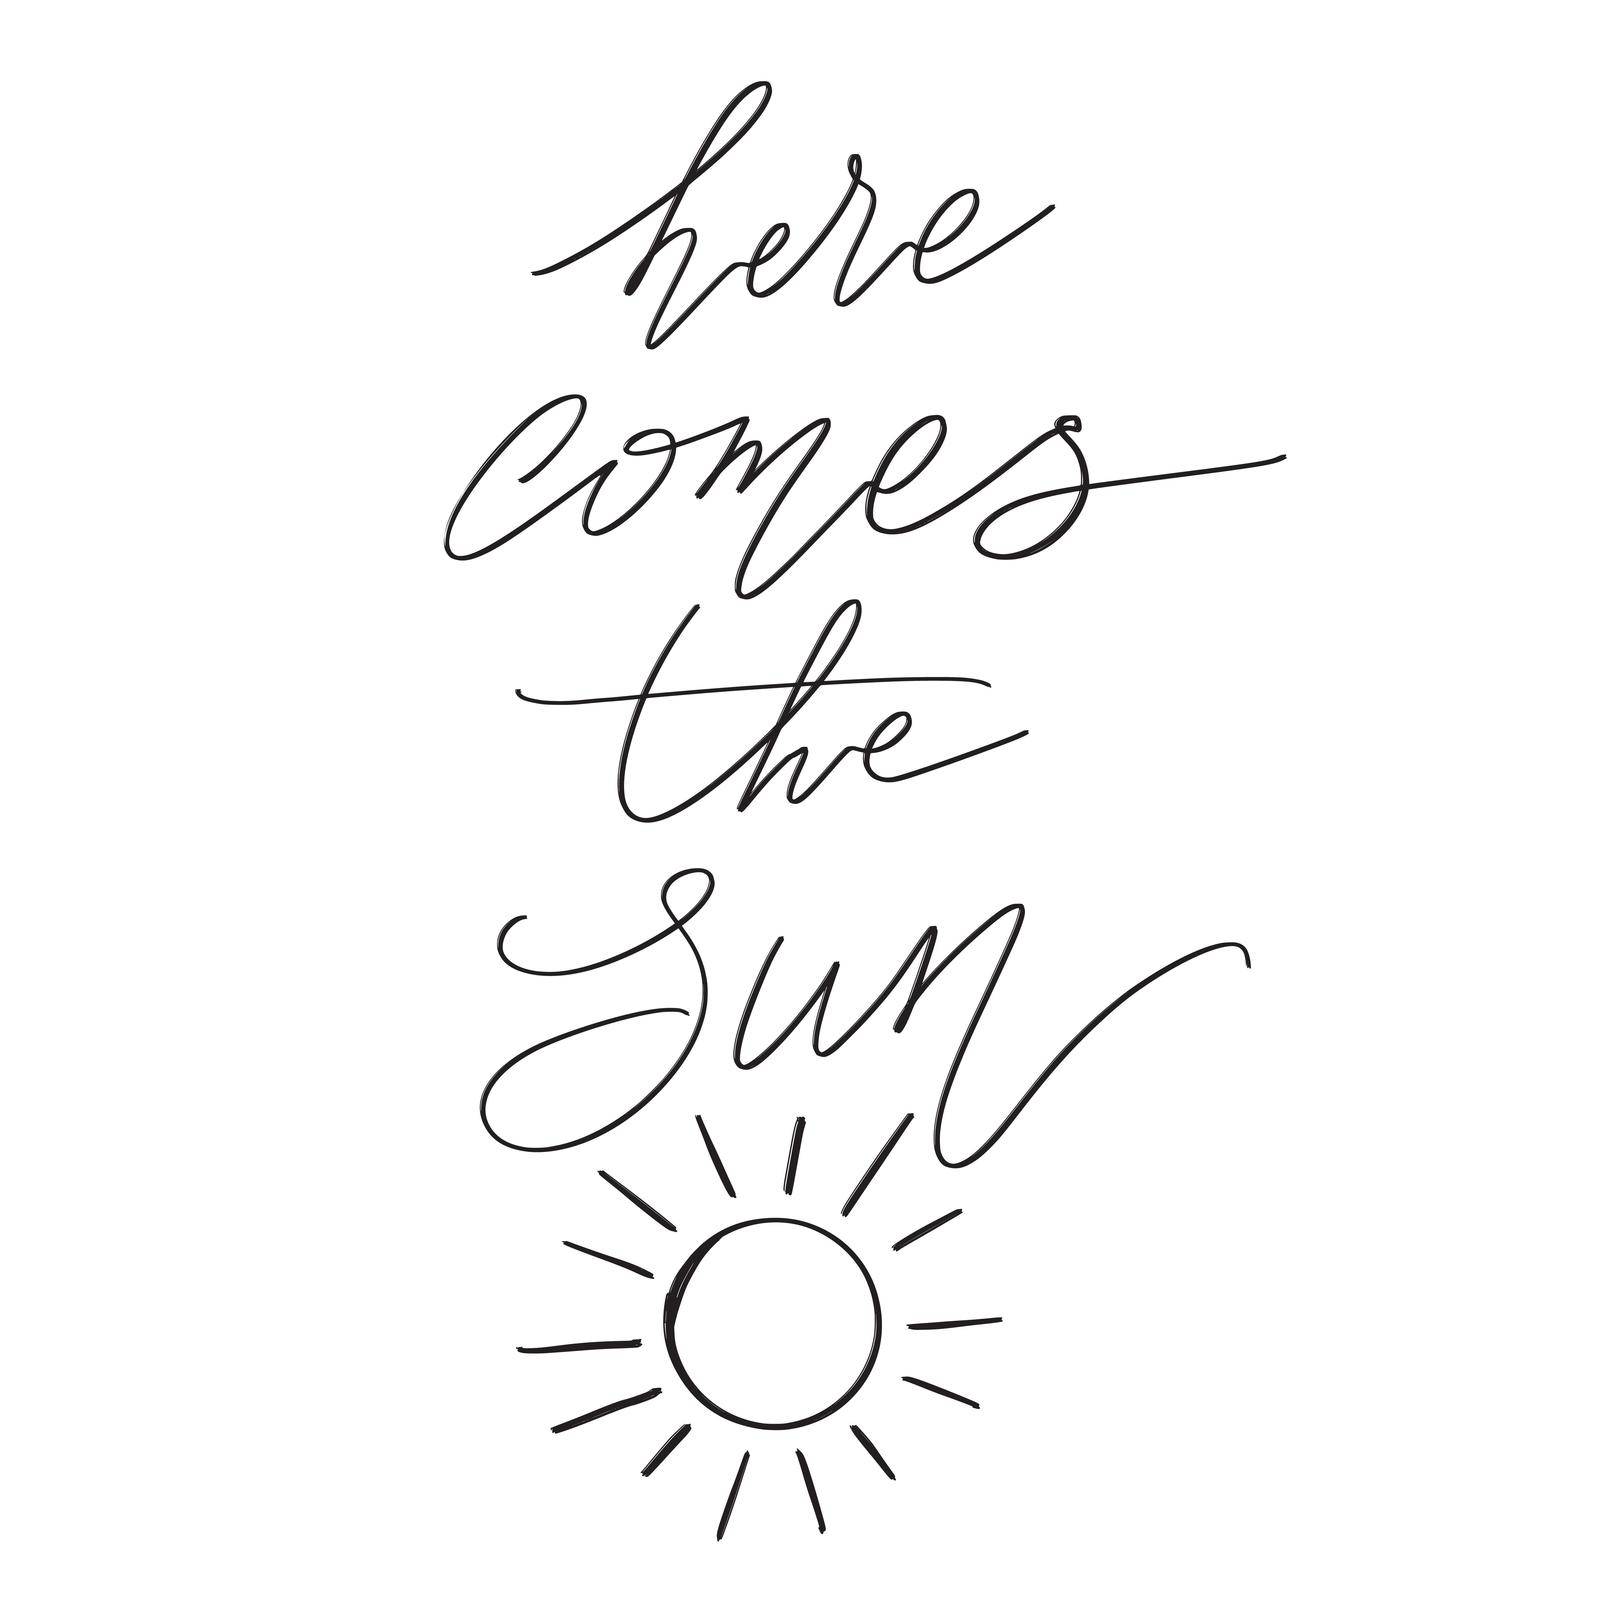 Here comes the sun, Hand drawn Summer Lettering for Print, Greeting cards, apparel design. by iliris